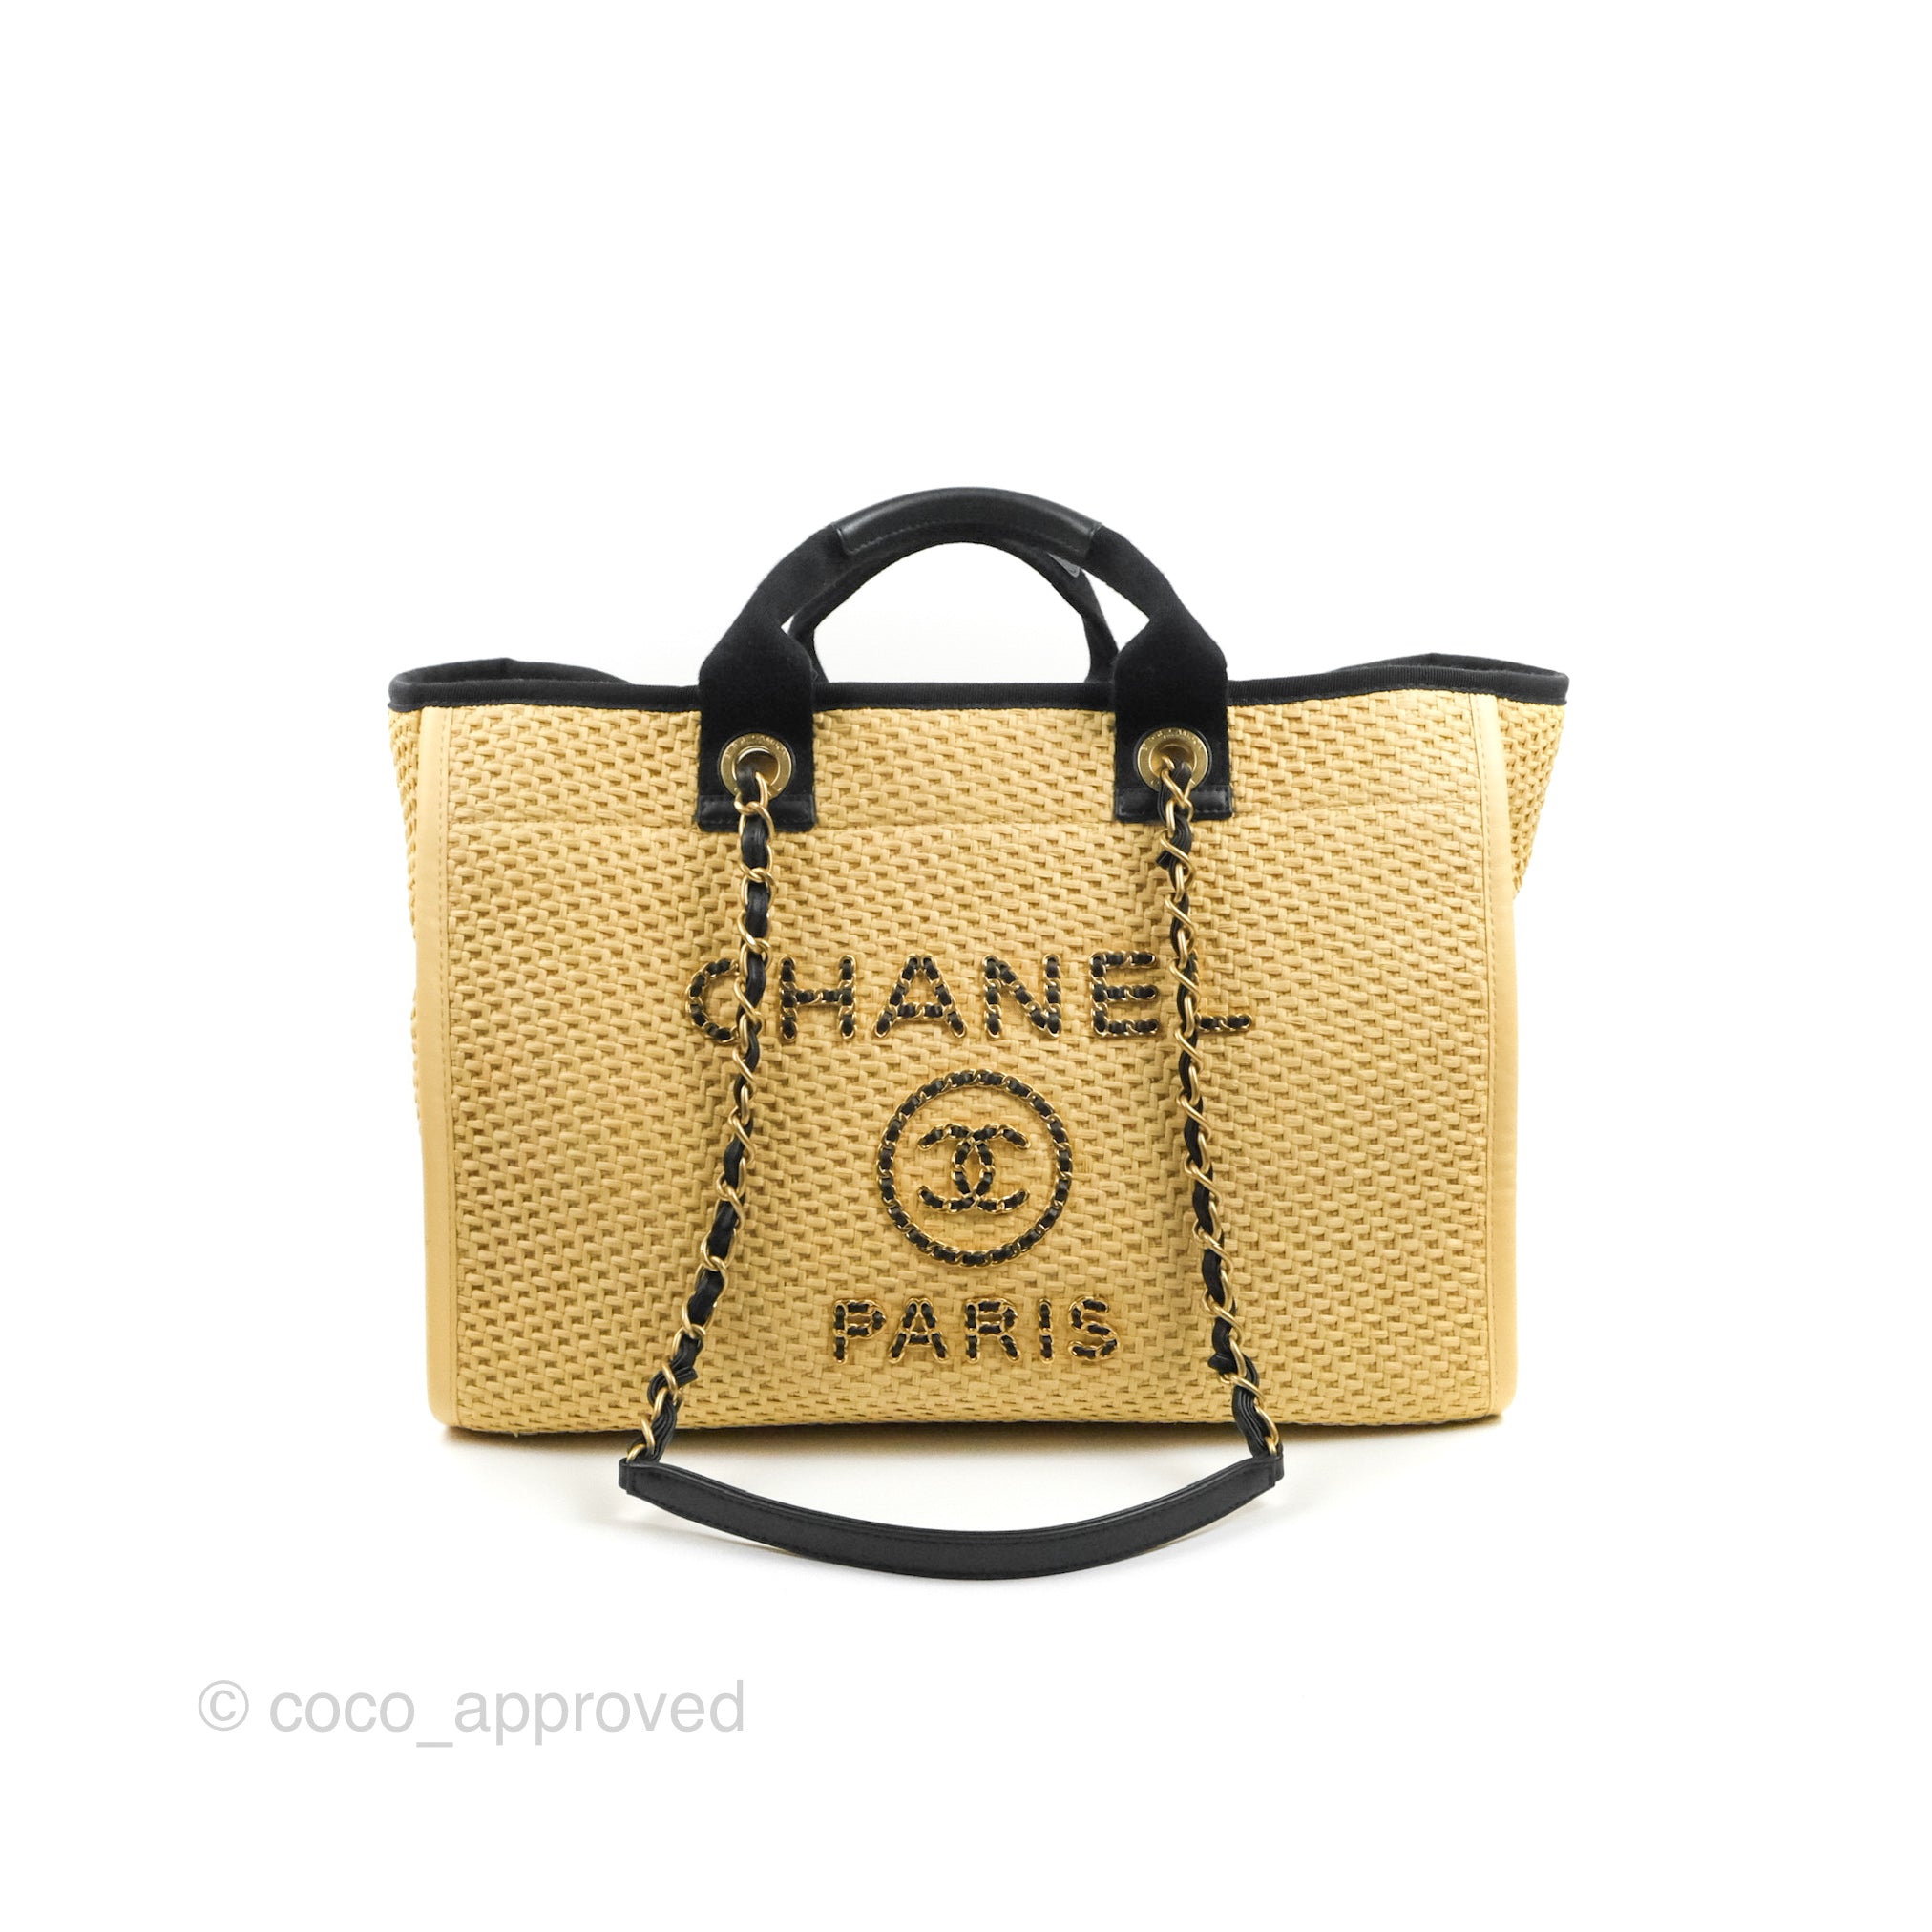 CHANEL, Bags, Chanel Deauville Large Shopping Bag Black Canvas With  Silver Hardware